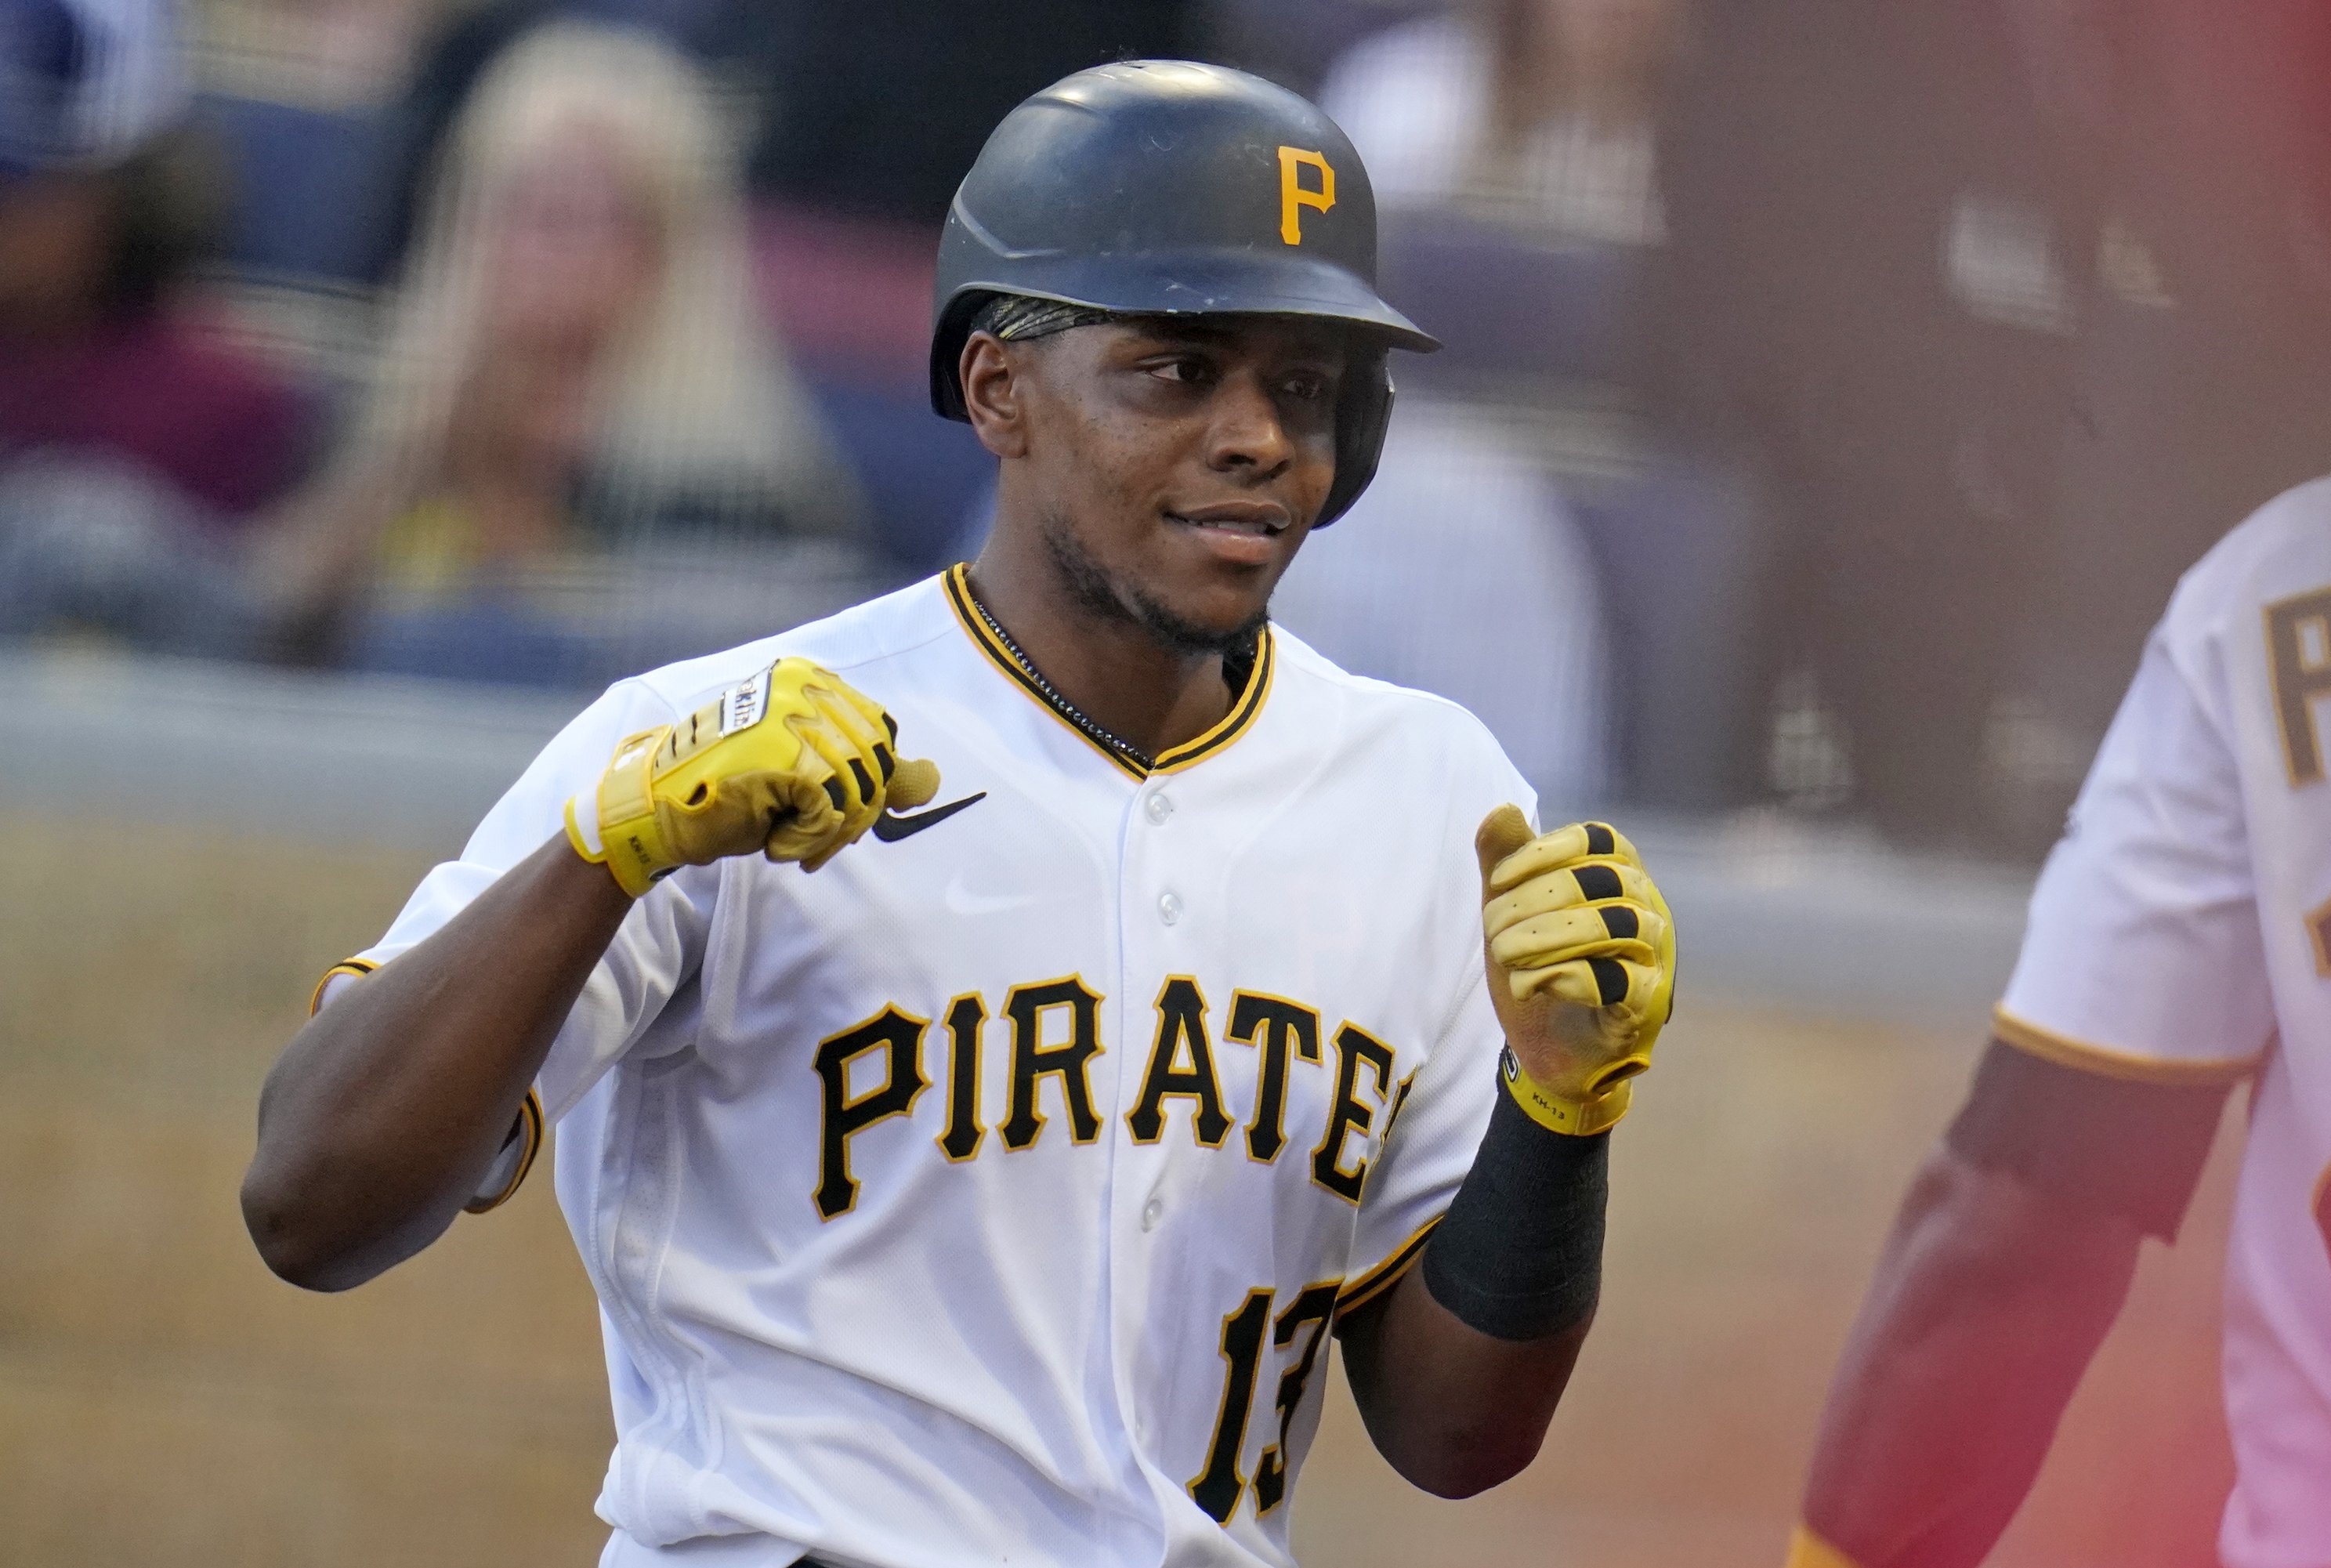 Players of the Week: Max Stassi, Starling Marte